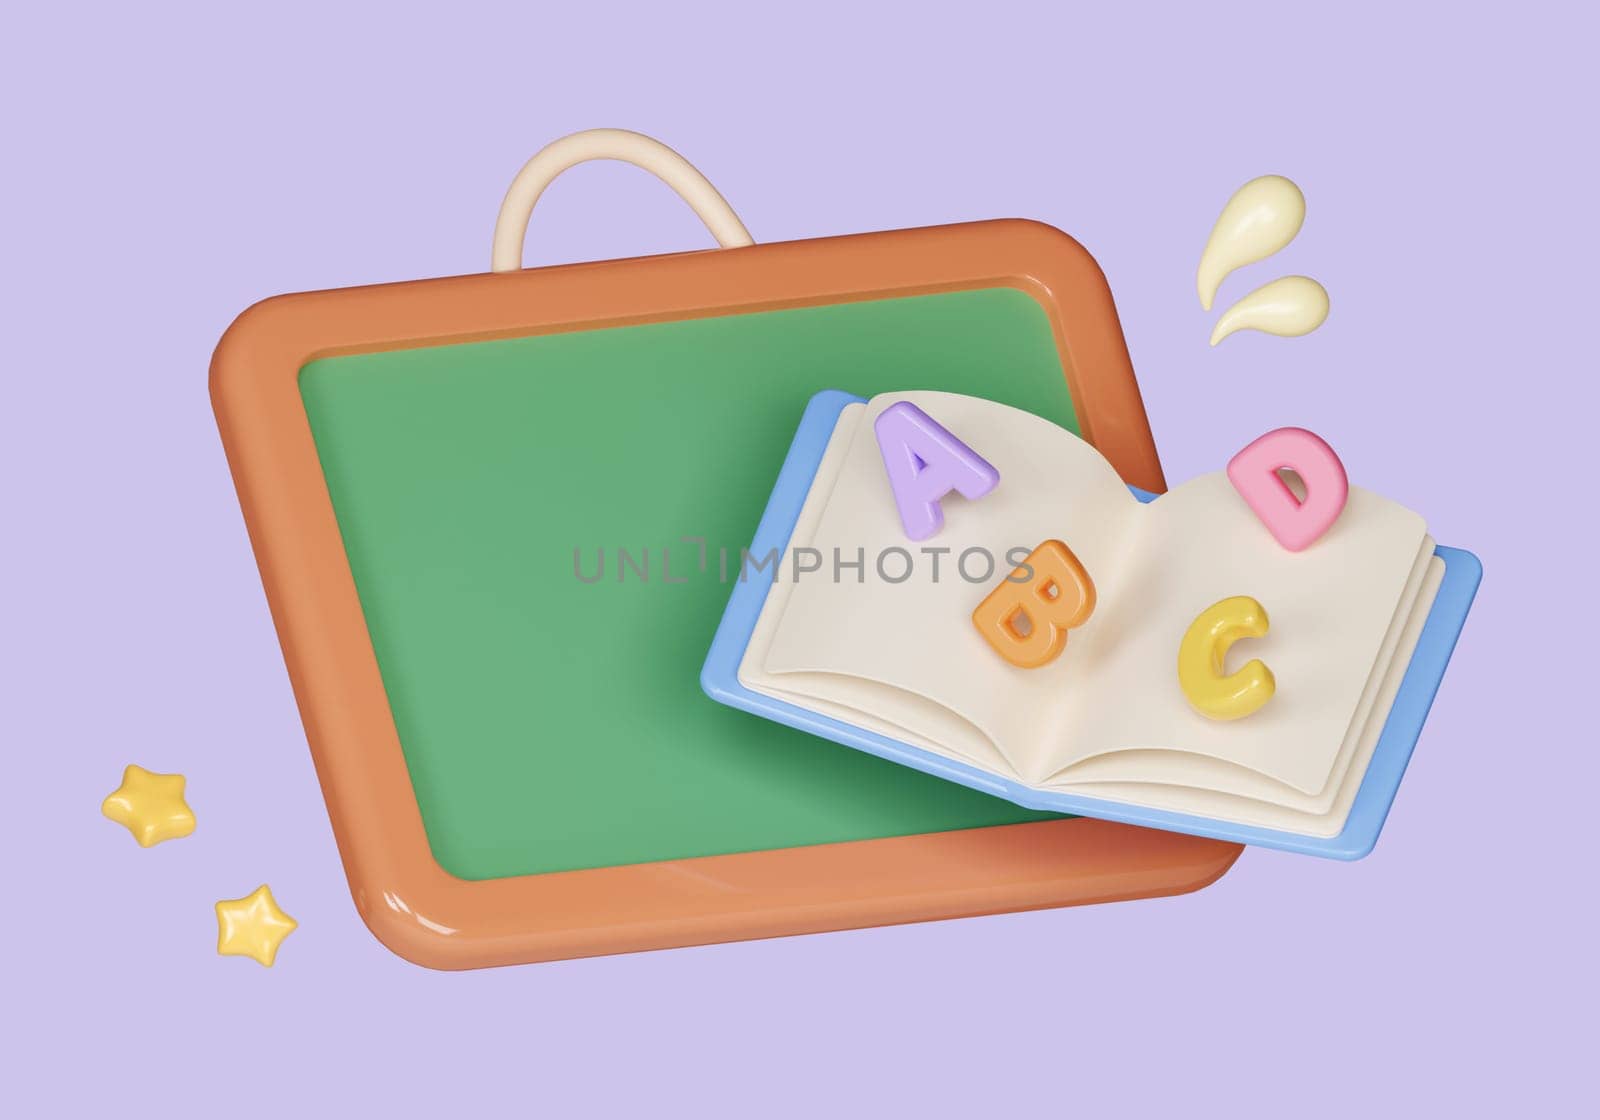 3D Chalkboard and textbook cartoon style isolated on pastel background. icon symbol clipping path. education. 3d render illustration by meepiangraphic